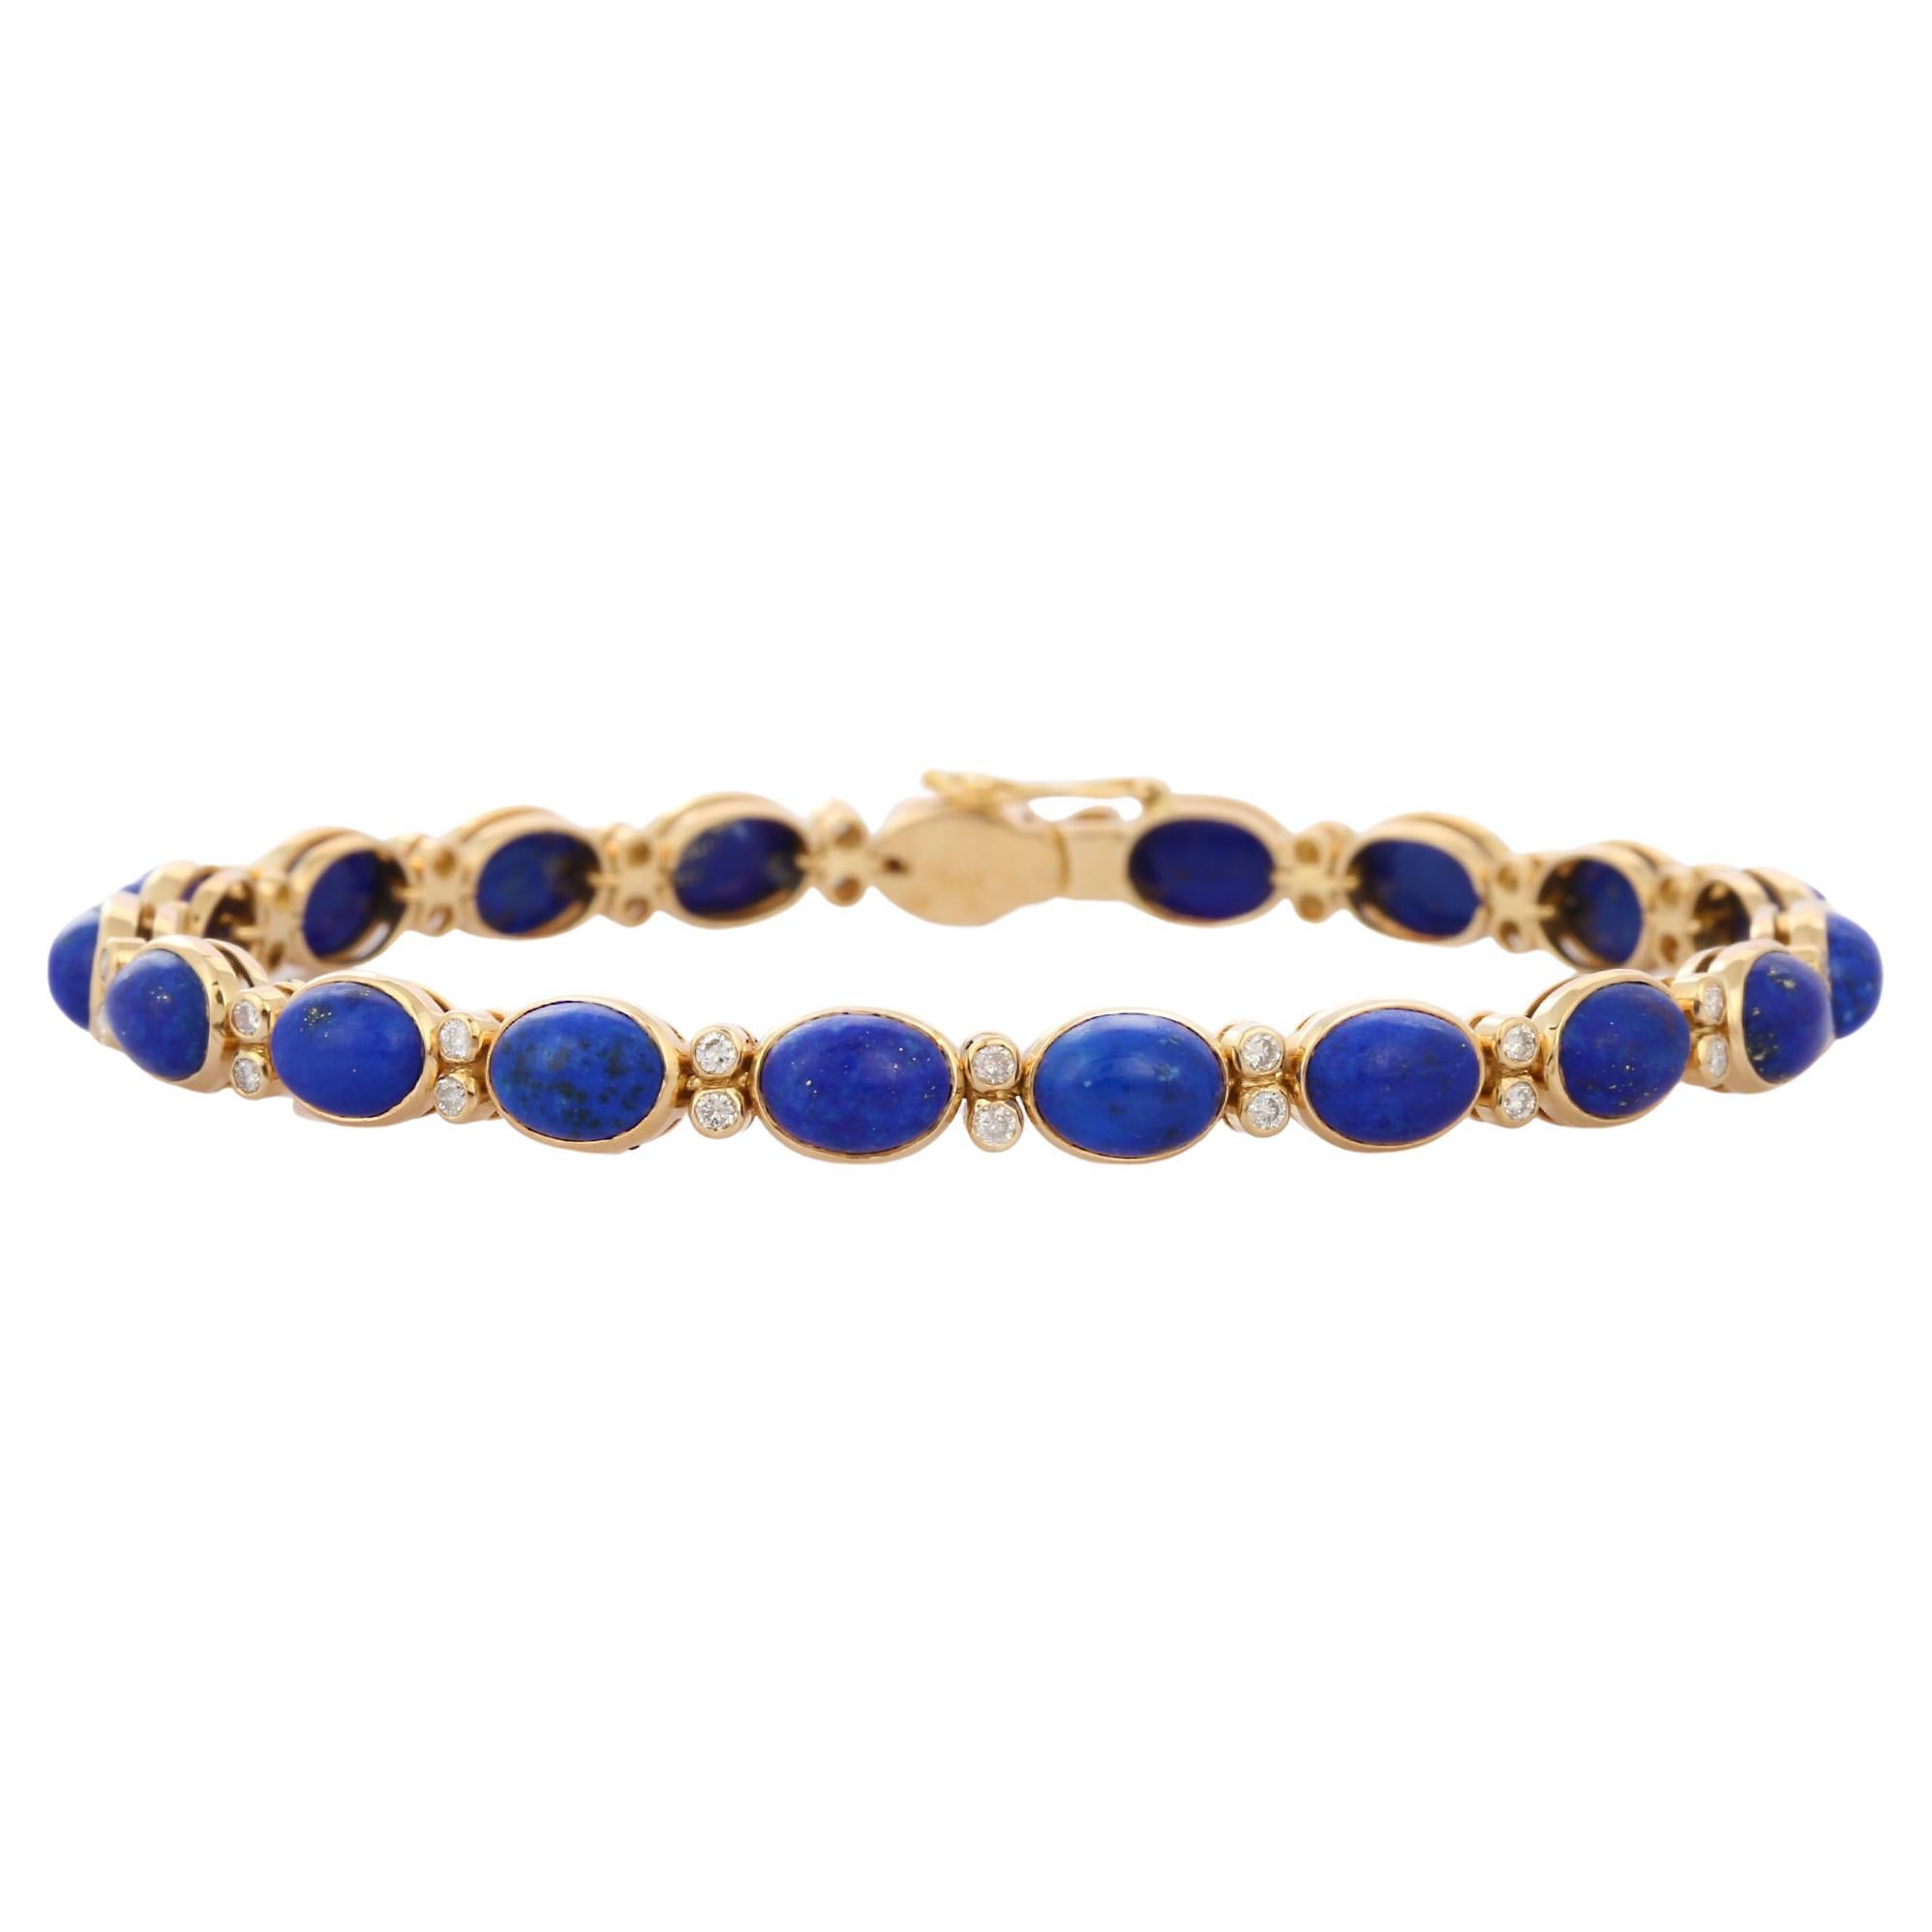 Oval Cut 17.45 Ct Lapis and Diamond Tennis Bracelet in 18K Yellow Gold